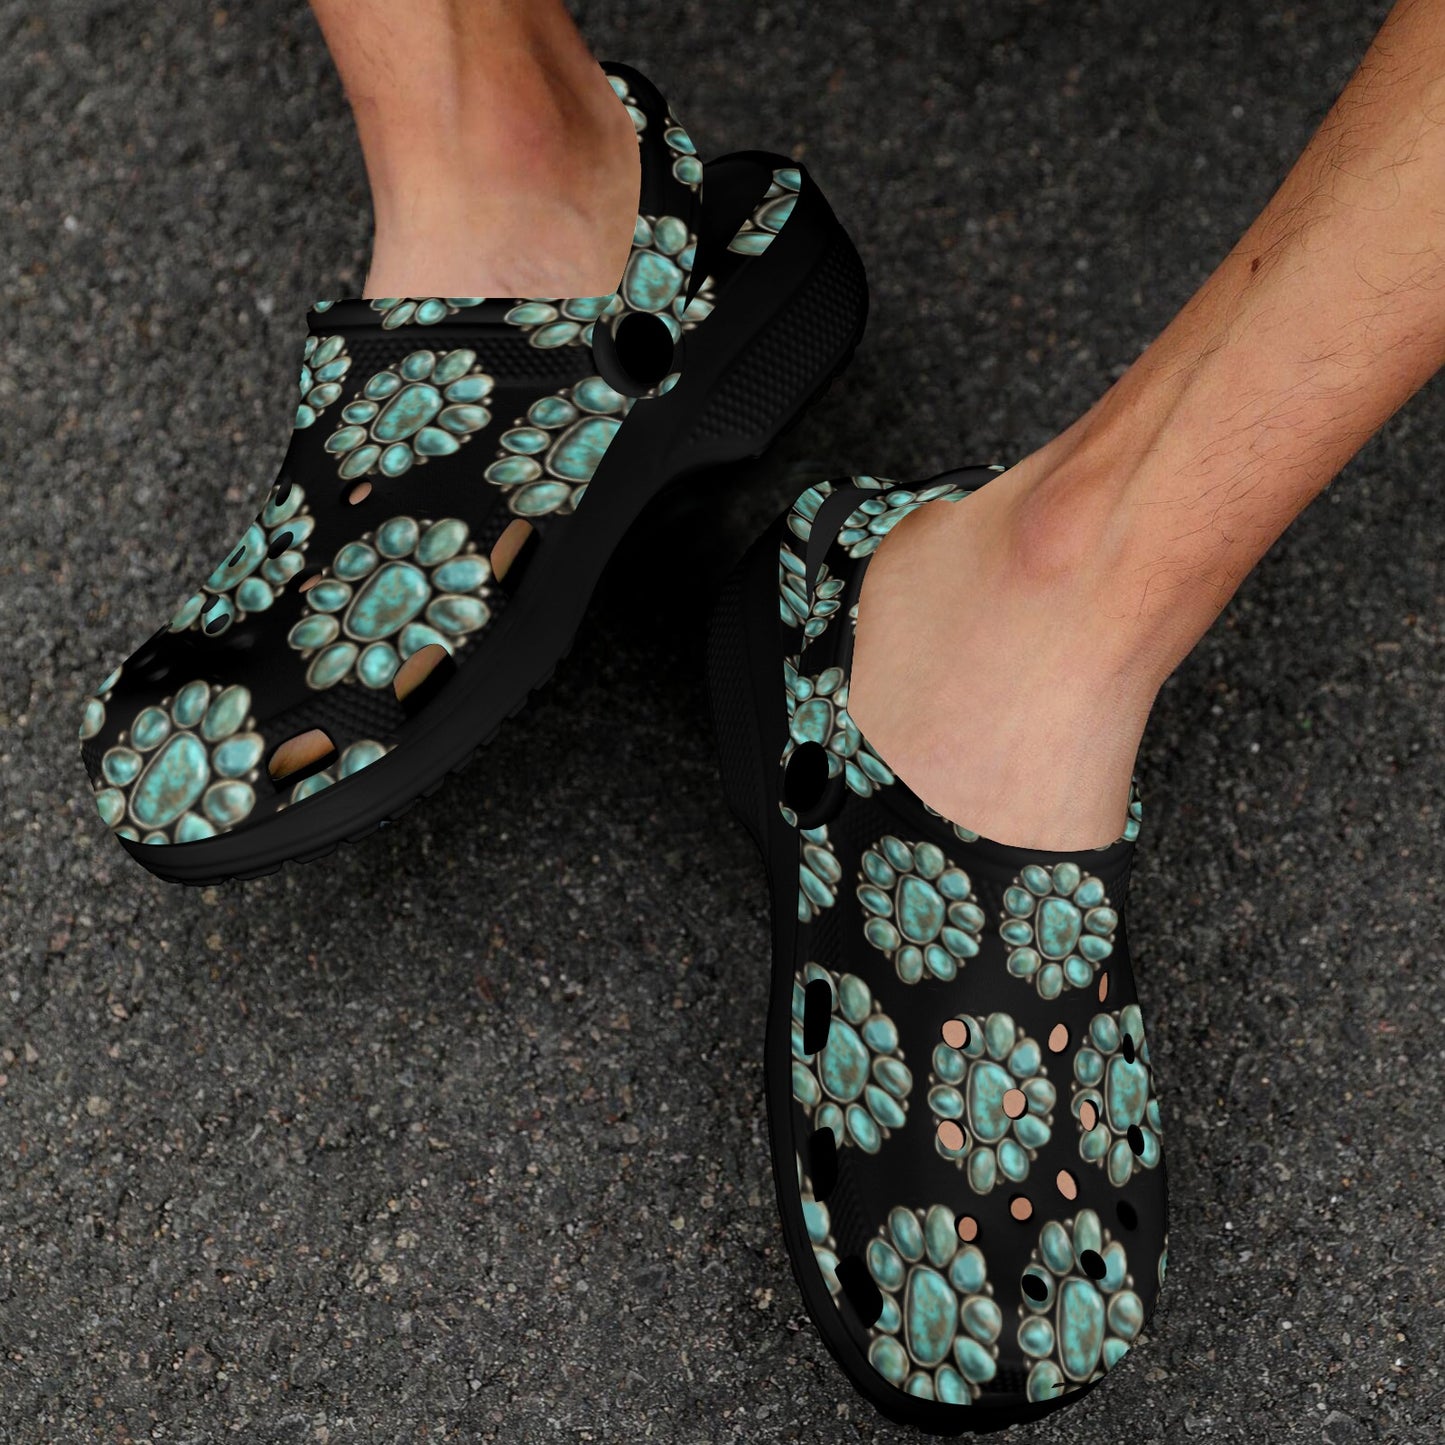 New Turquoise Concho Clogs